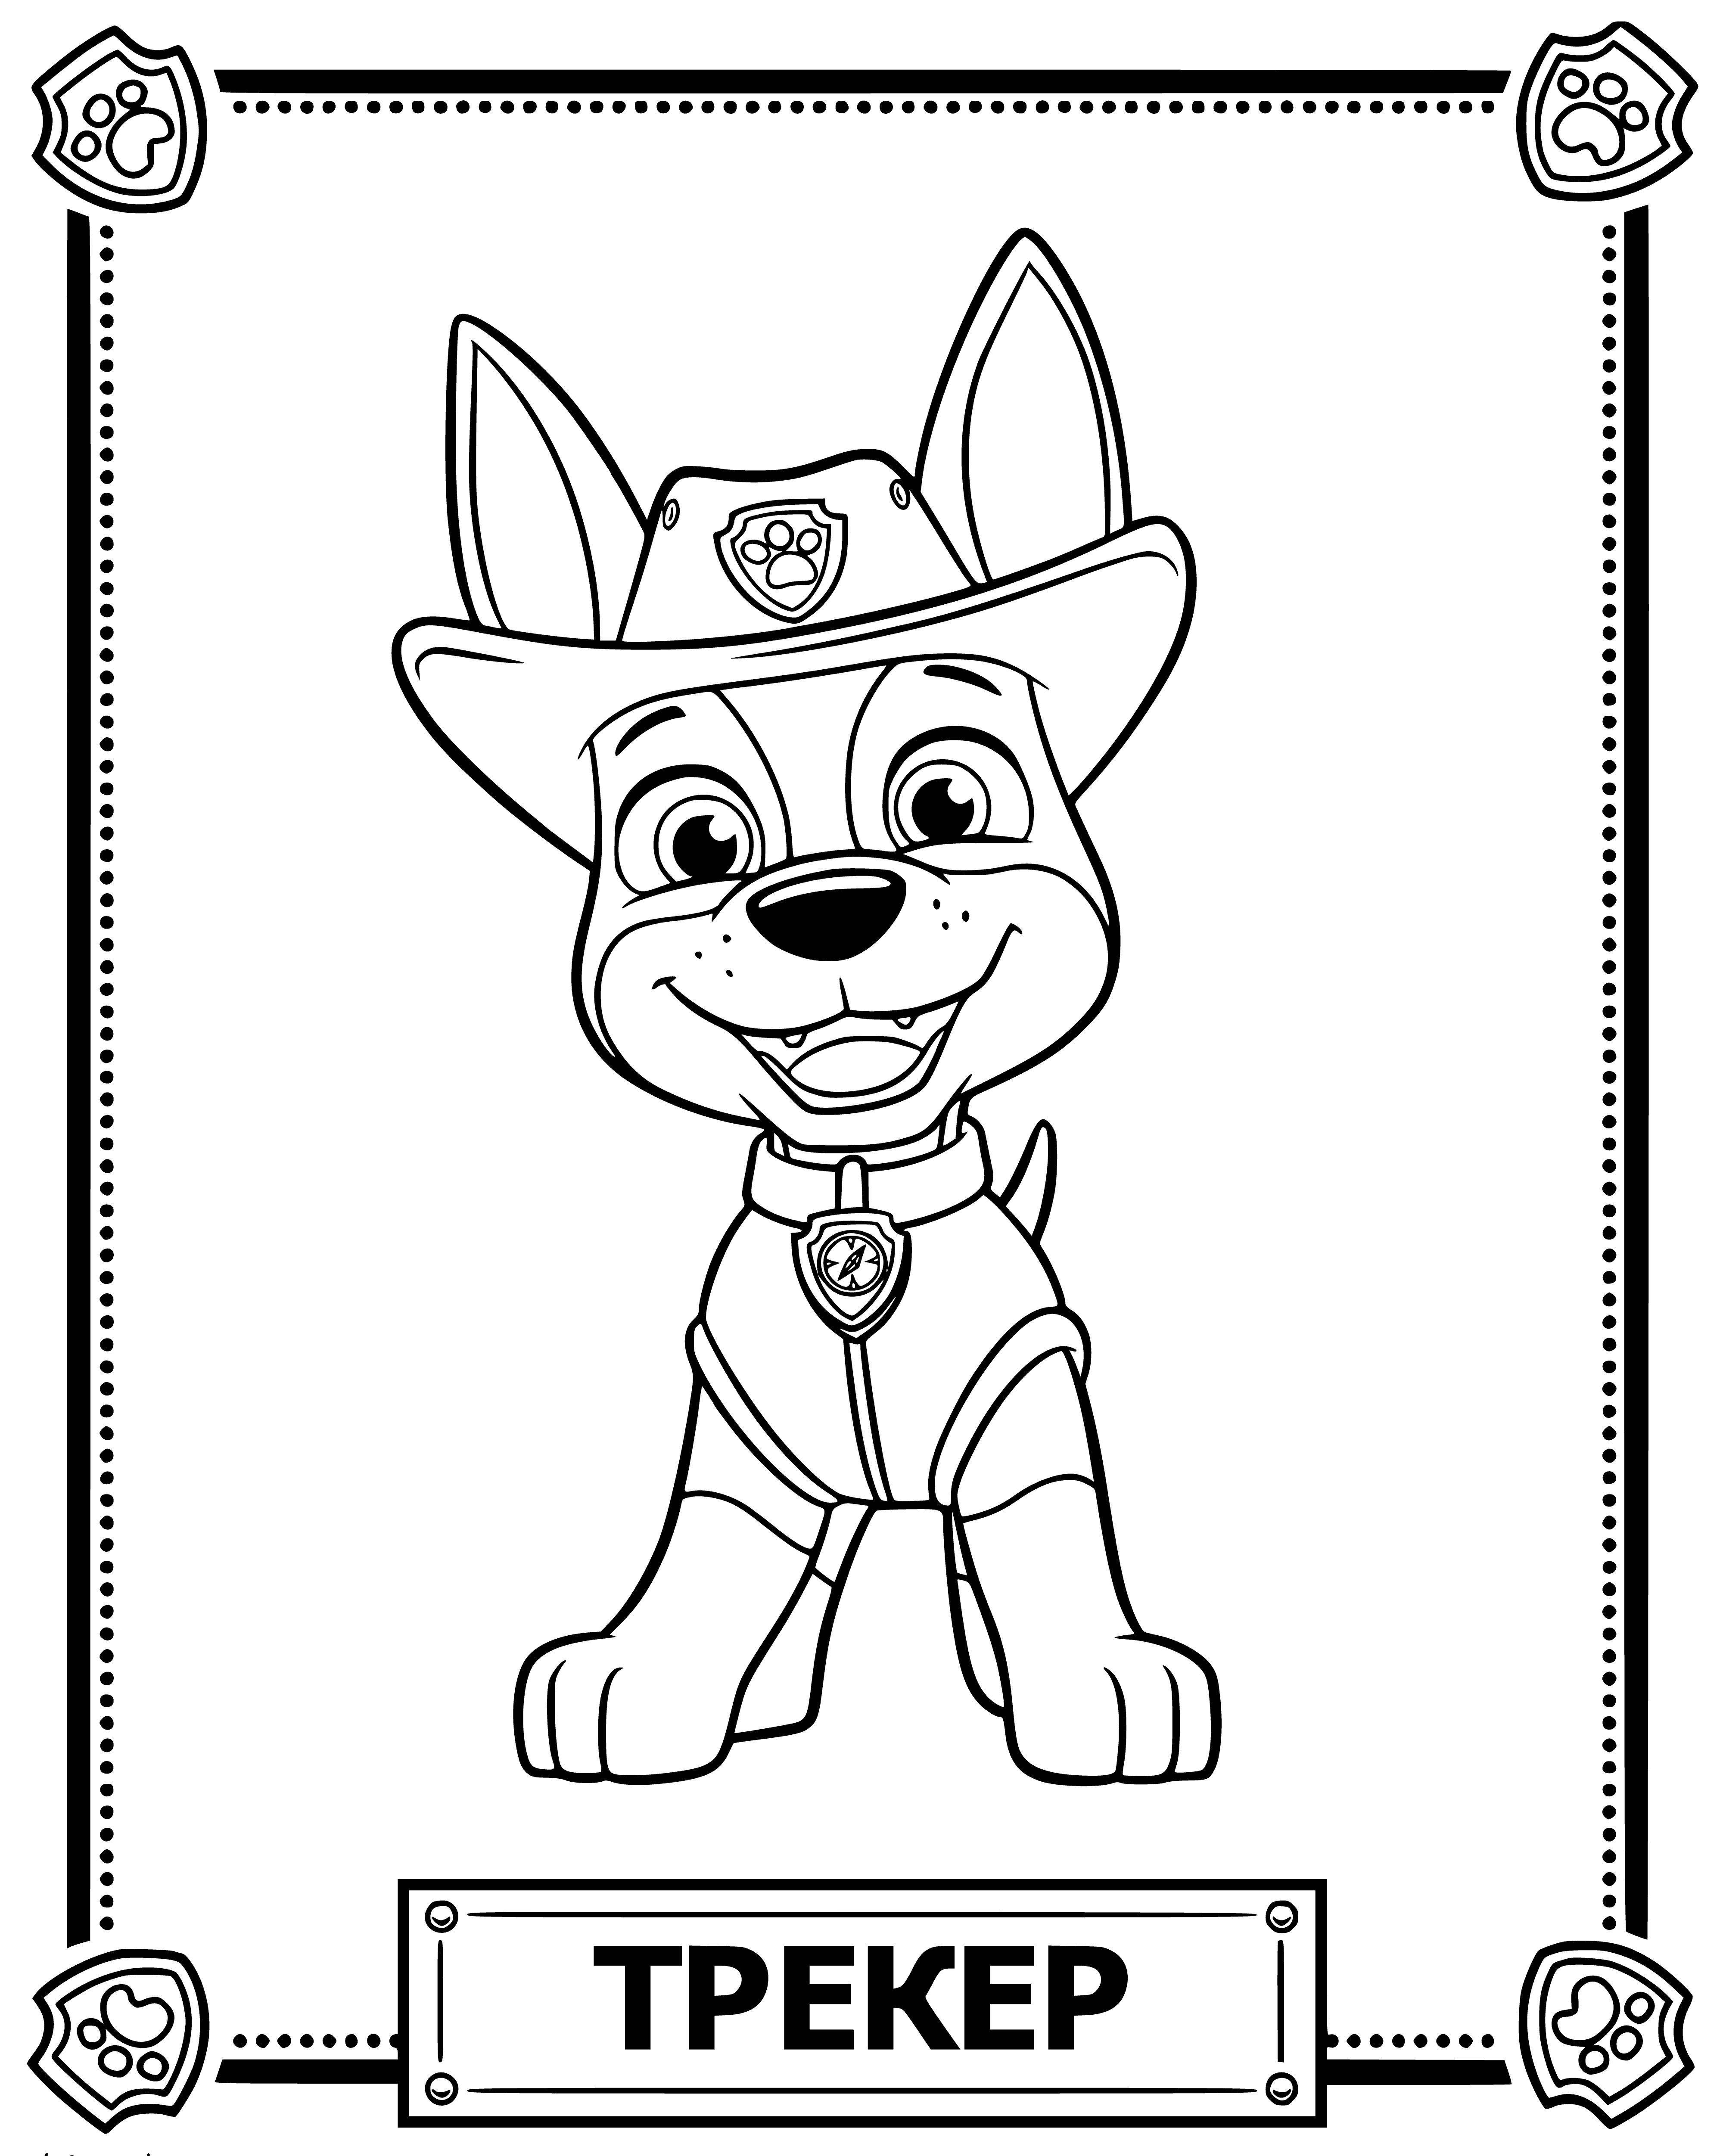 coloring page: Tracker, the brown & white pup, is one of Ryder's team & always finds lost things or solves mysteries in PAW Patrol.